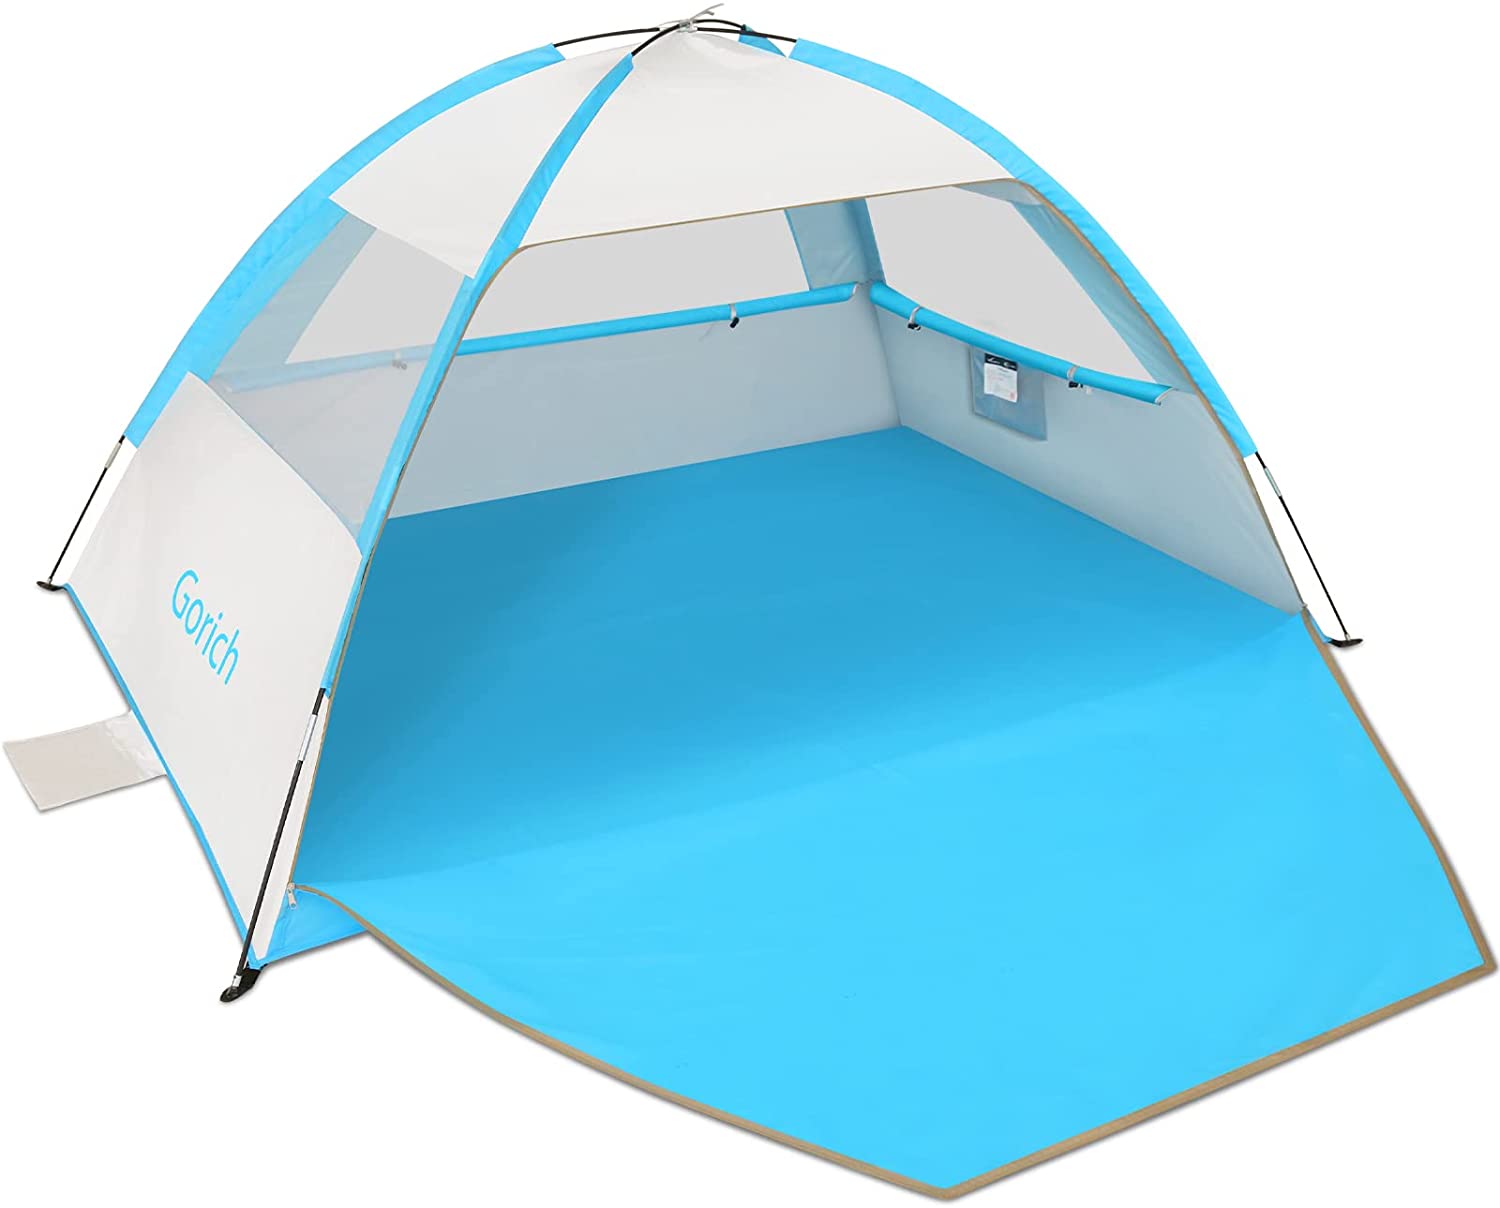 Review of Gorich Beach Tent, Beach Shade Tent for 3/4-5/6-7 Person